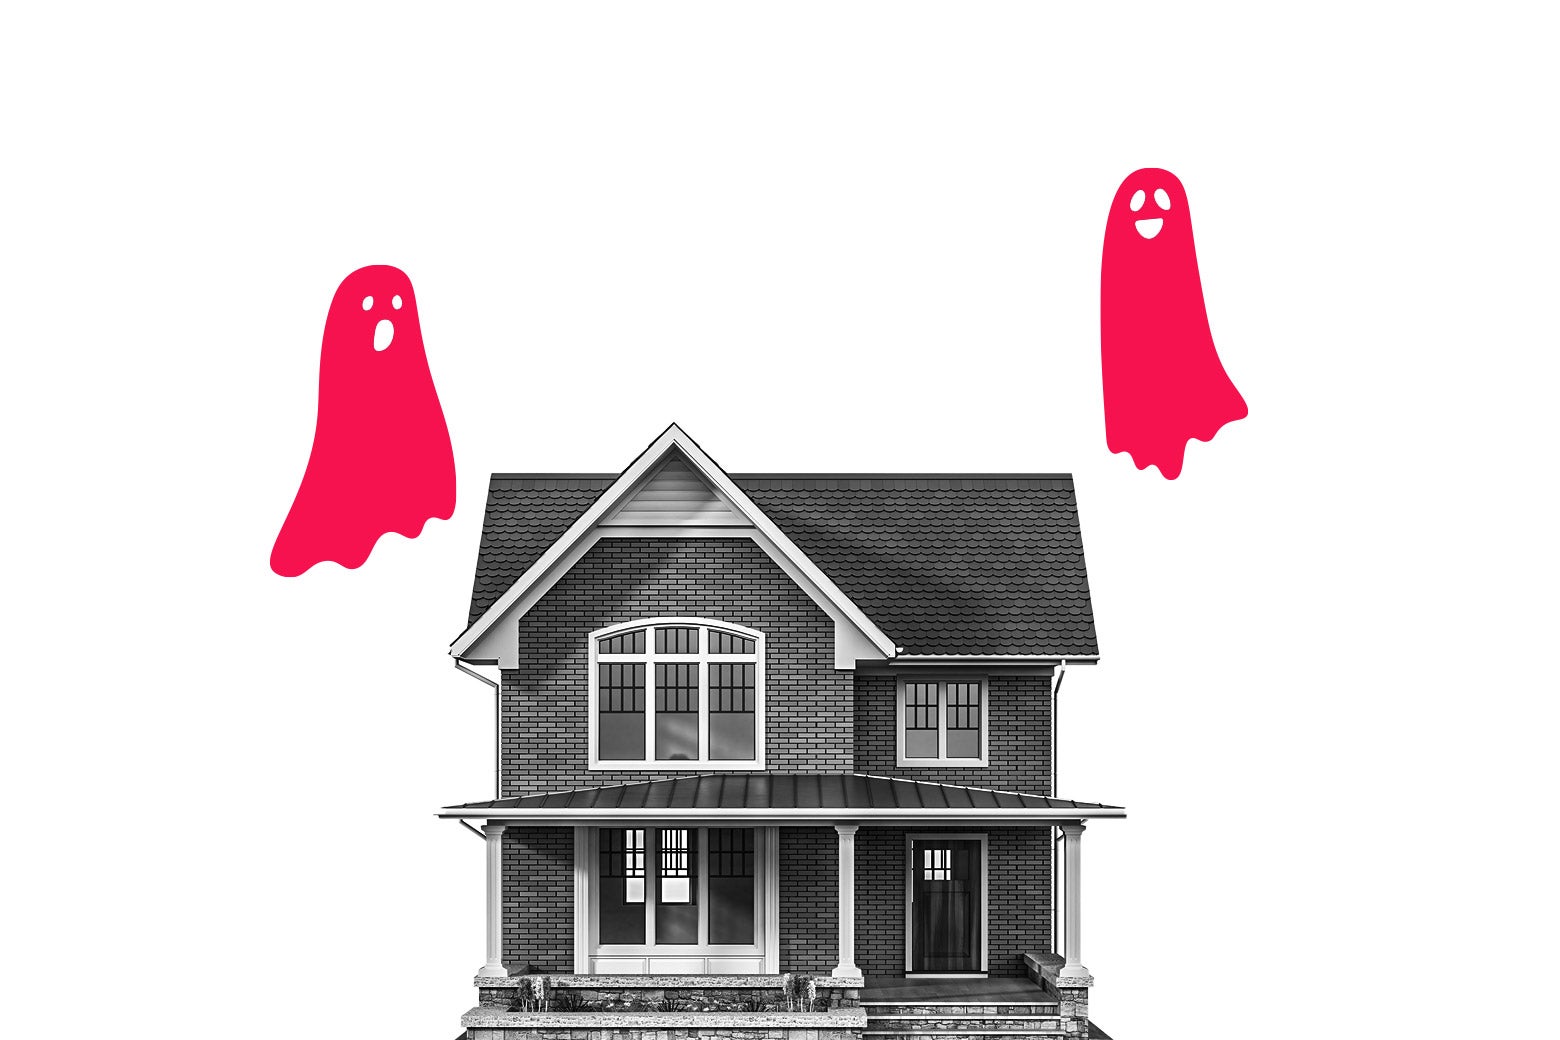 A two-story house with two ghosts floating next to it.